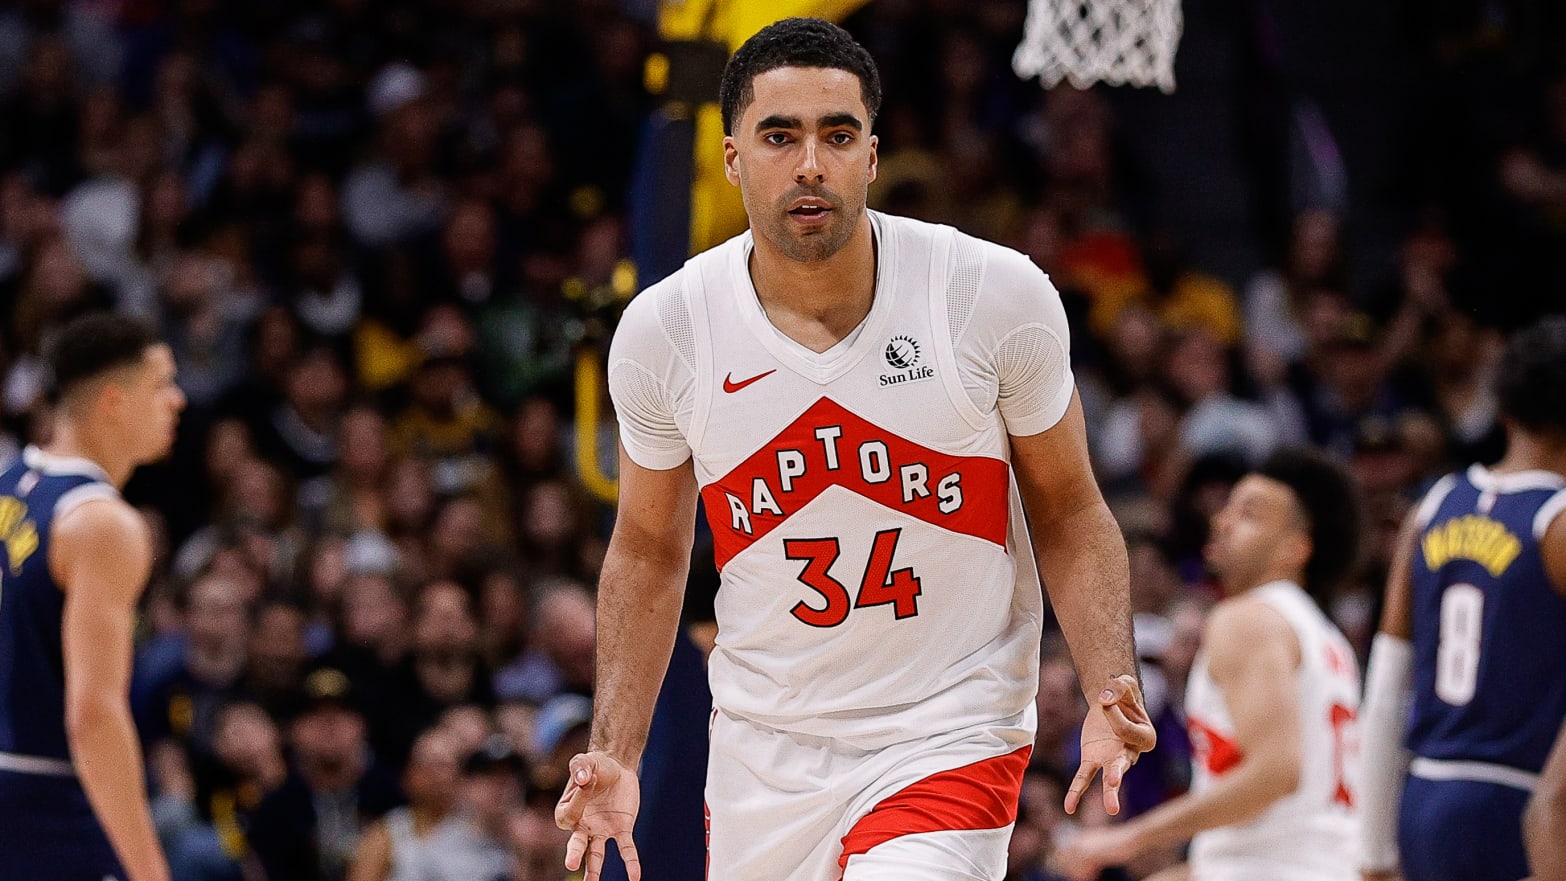 Jontay Porter banned for life over gambling violations following investigation